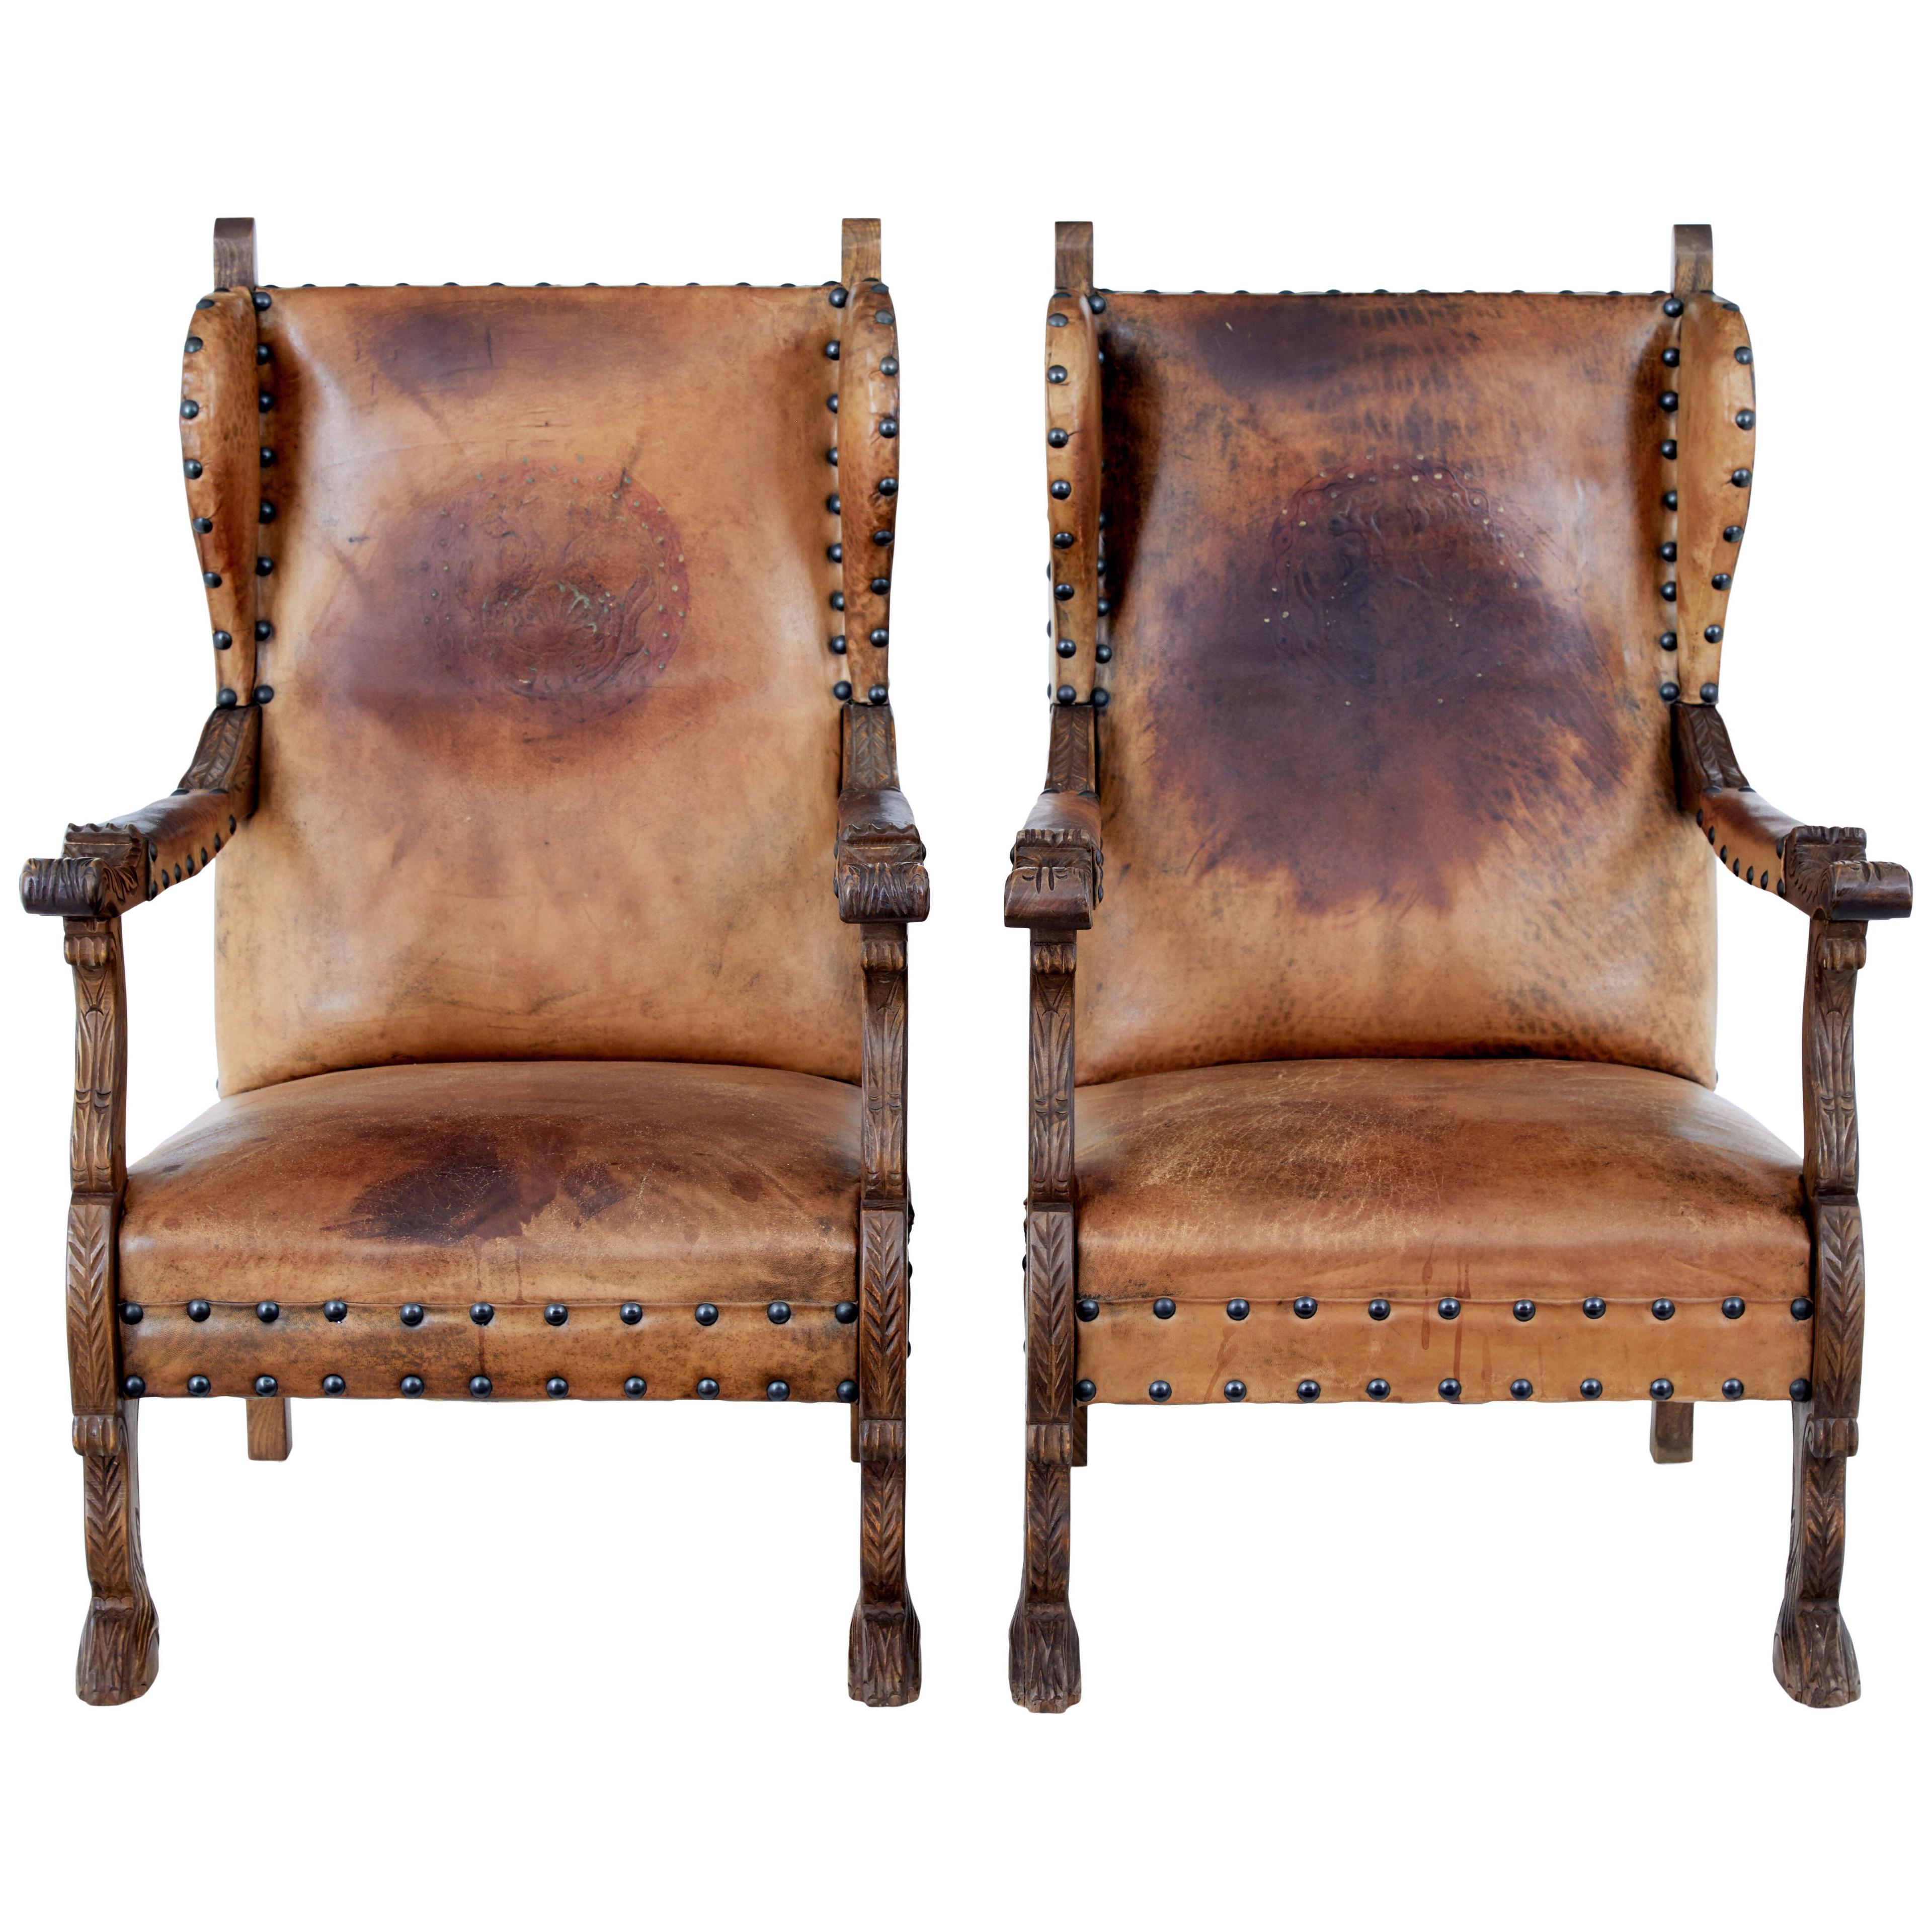 PAIR OF 19TH CENTURY CARVED OAK AND LEATHER ARMCHAIRS